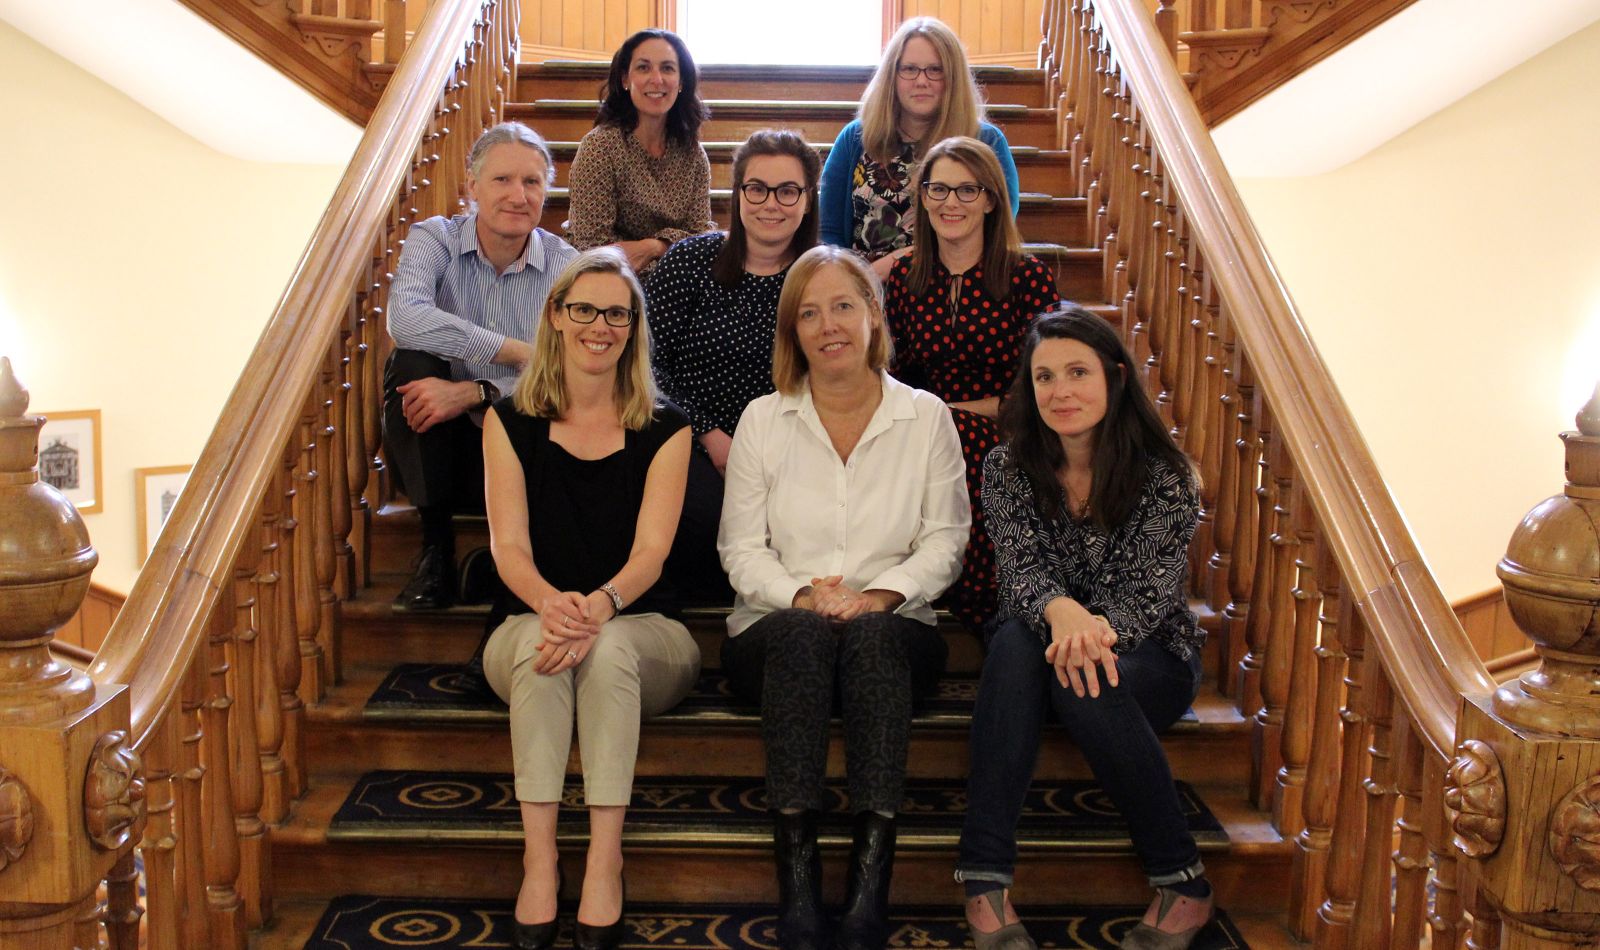 The Law School's Student Academic Services team – Pictured L-R: Back row: Lisa McCarthy, Josie Henning. Middle row: Jonathan Dempsey, Emily Fau-Goodwin, Kylie Hooper. Front row: Lucy Keyzers, Leigh Torode, Eleonora Bello.